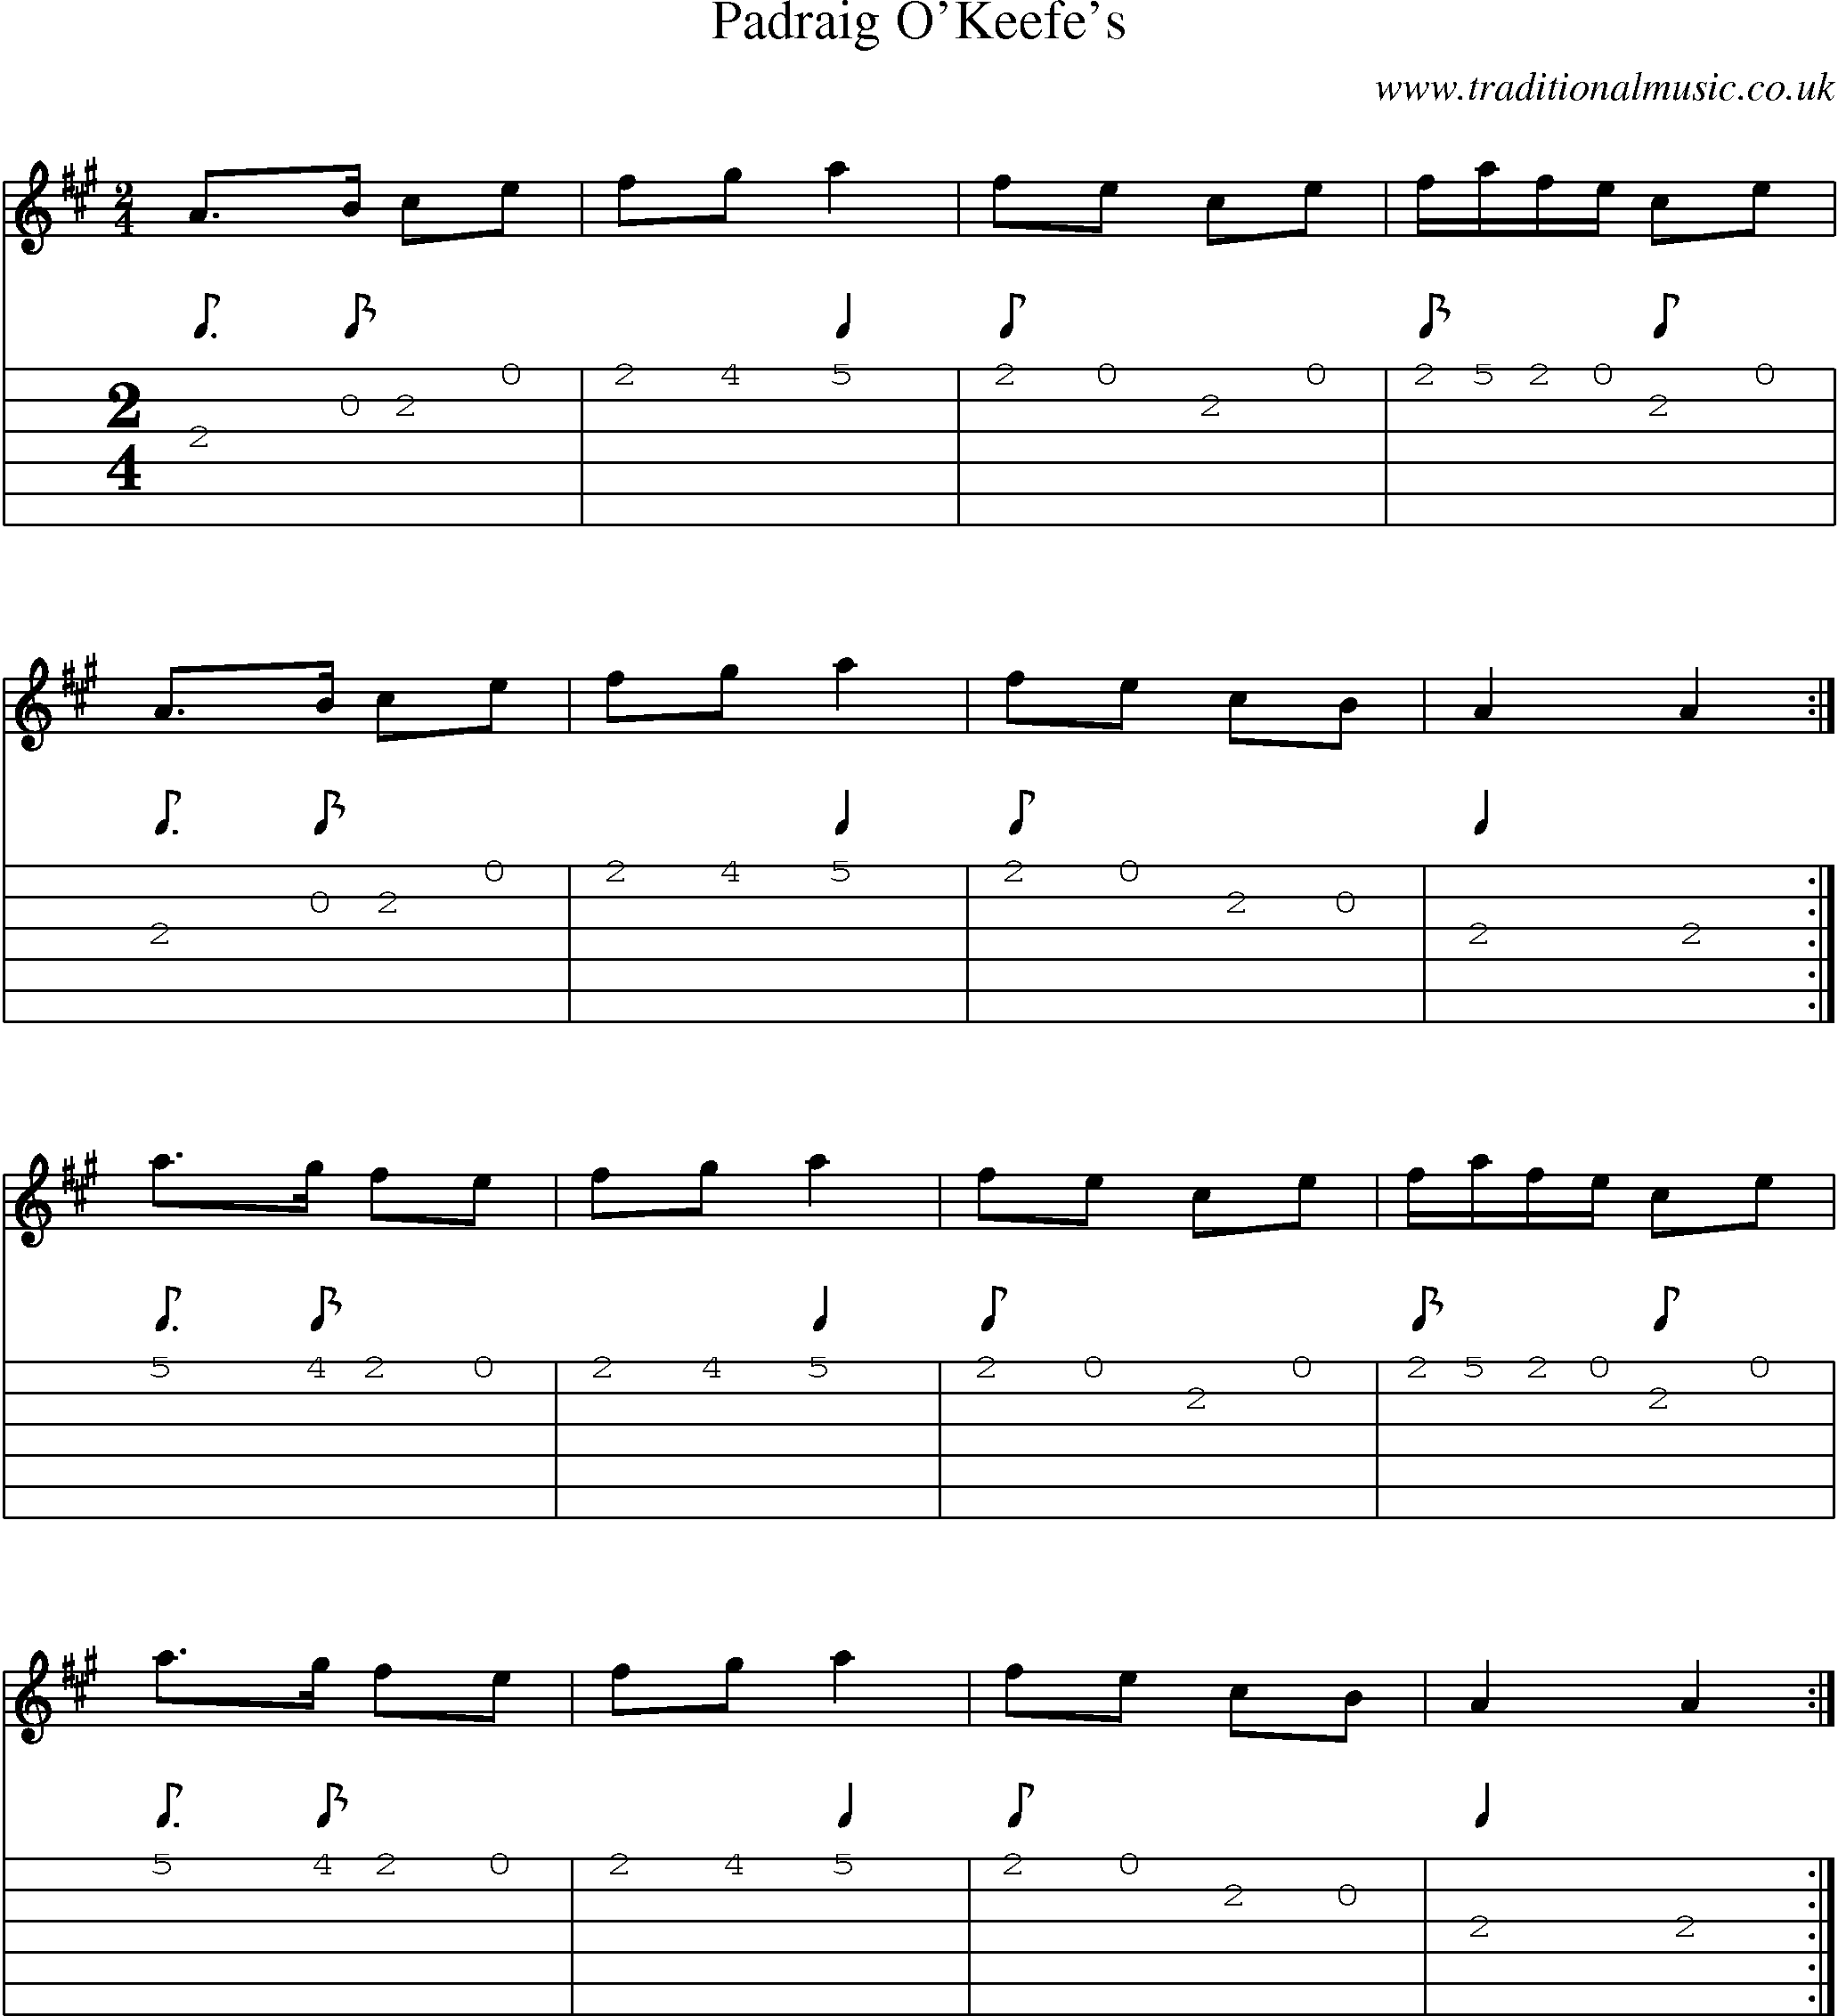 Music Score and Guitar Tabs for Padraig Okeefes